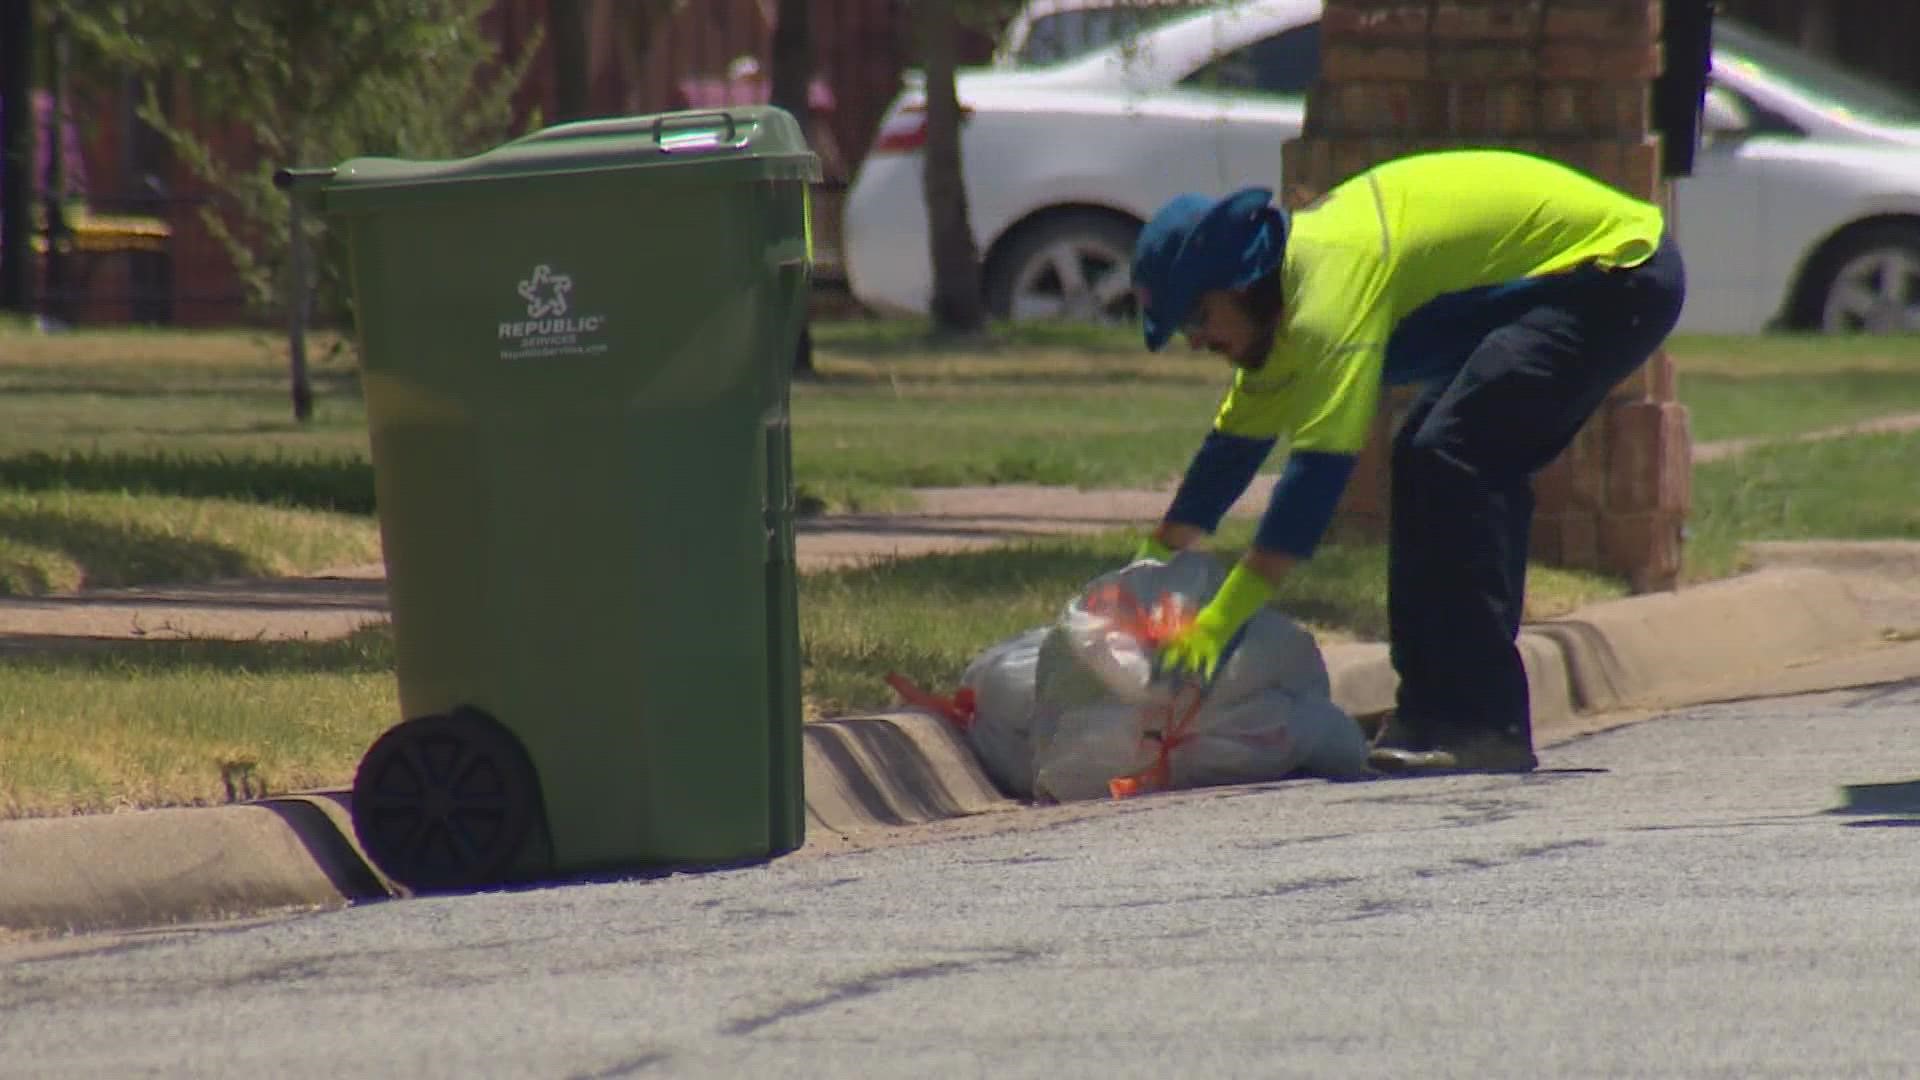 Cities are looking to possibly upgrade the department with automated trash collection trucks.